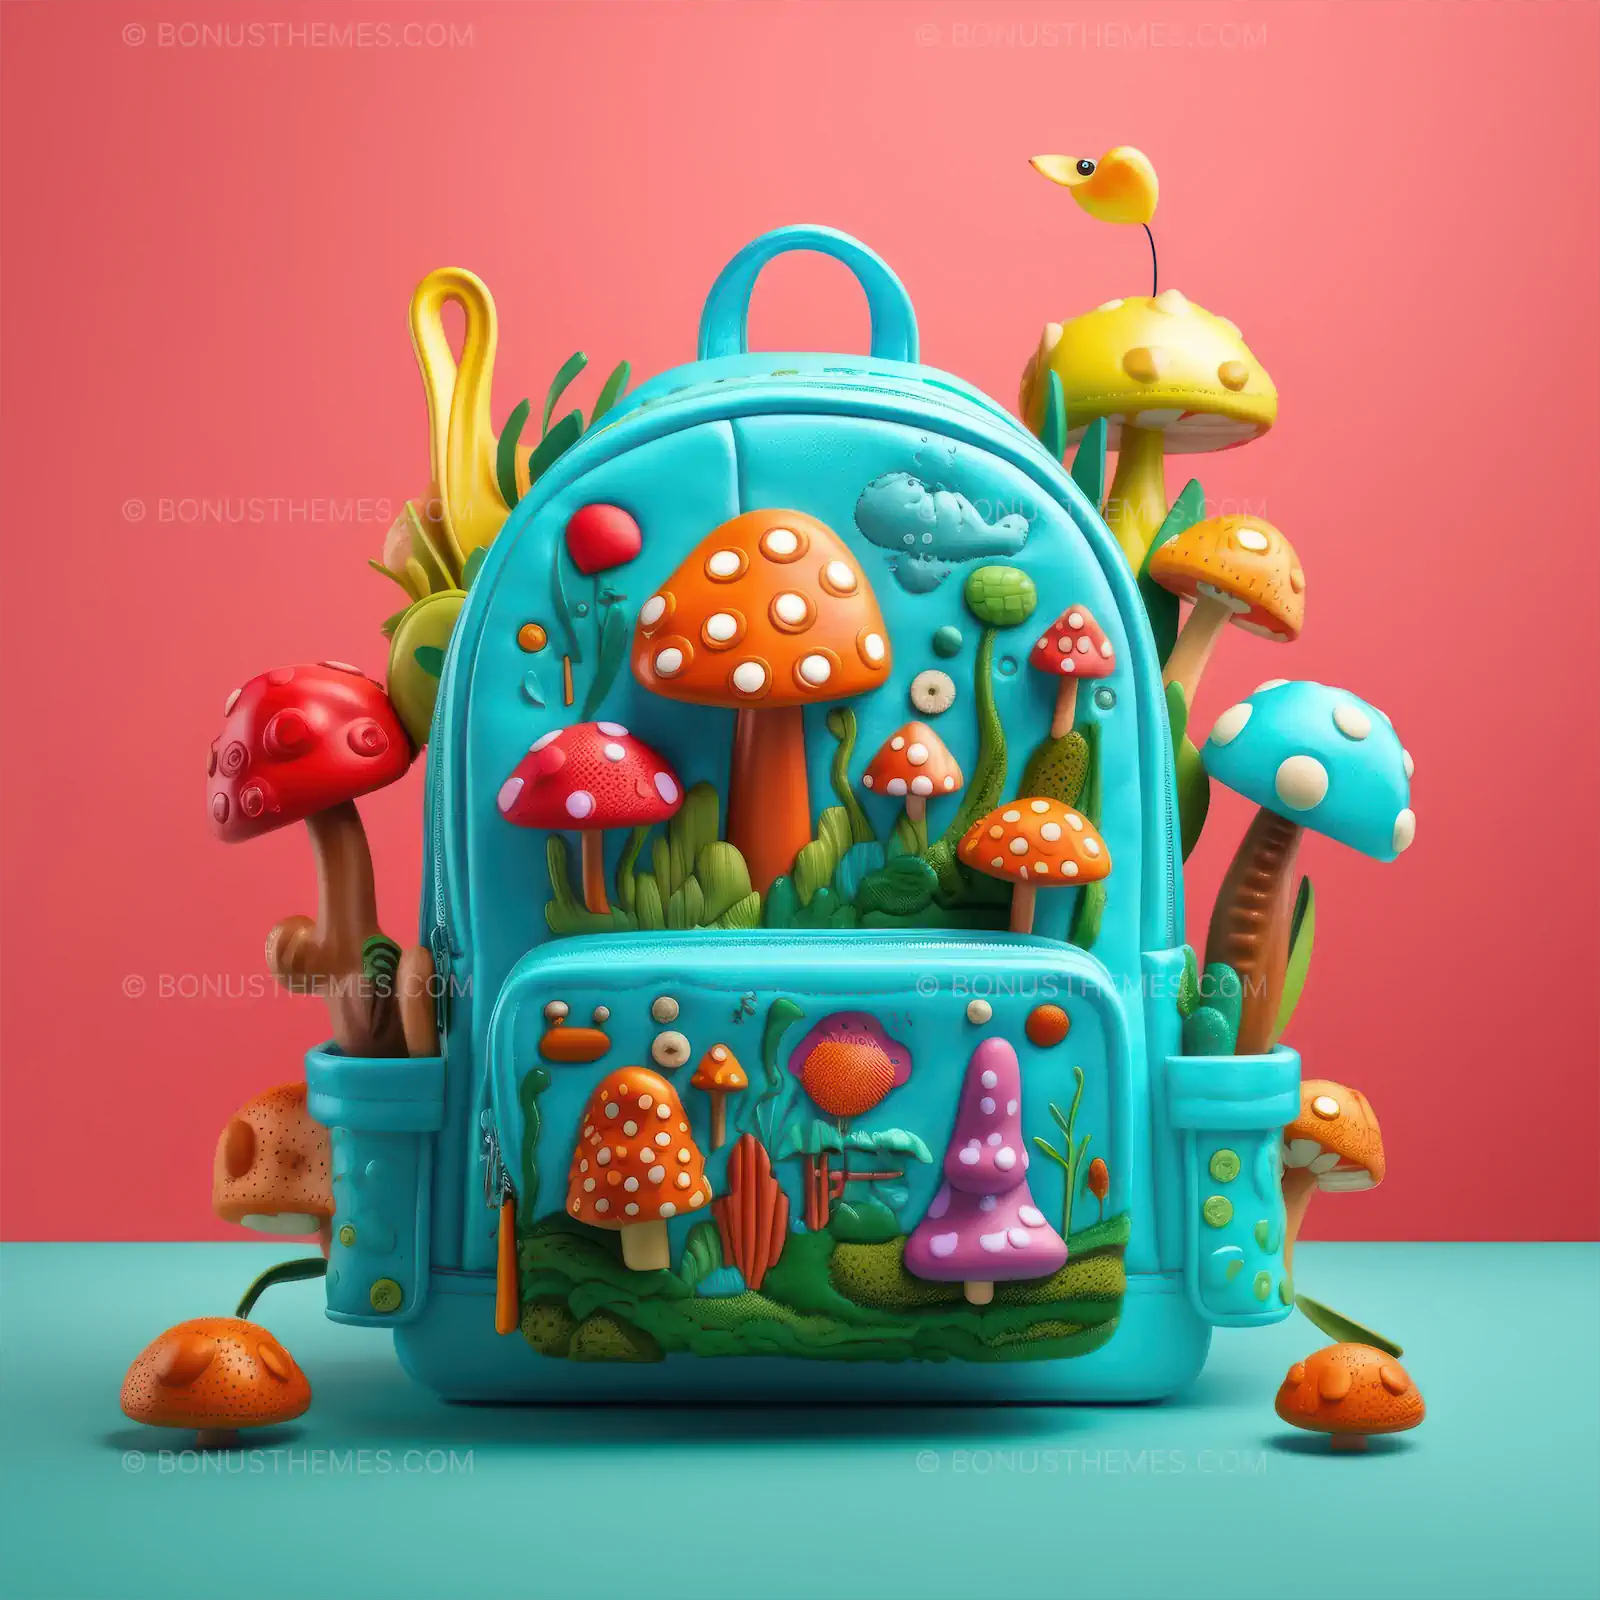 Vibrant fun children's backpack with mushrooms